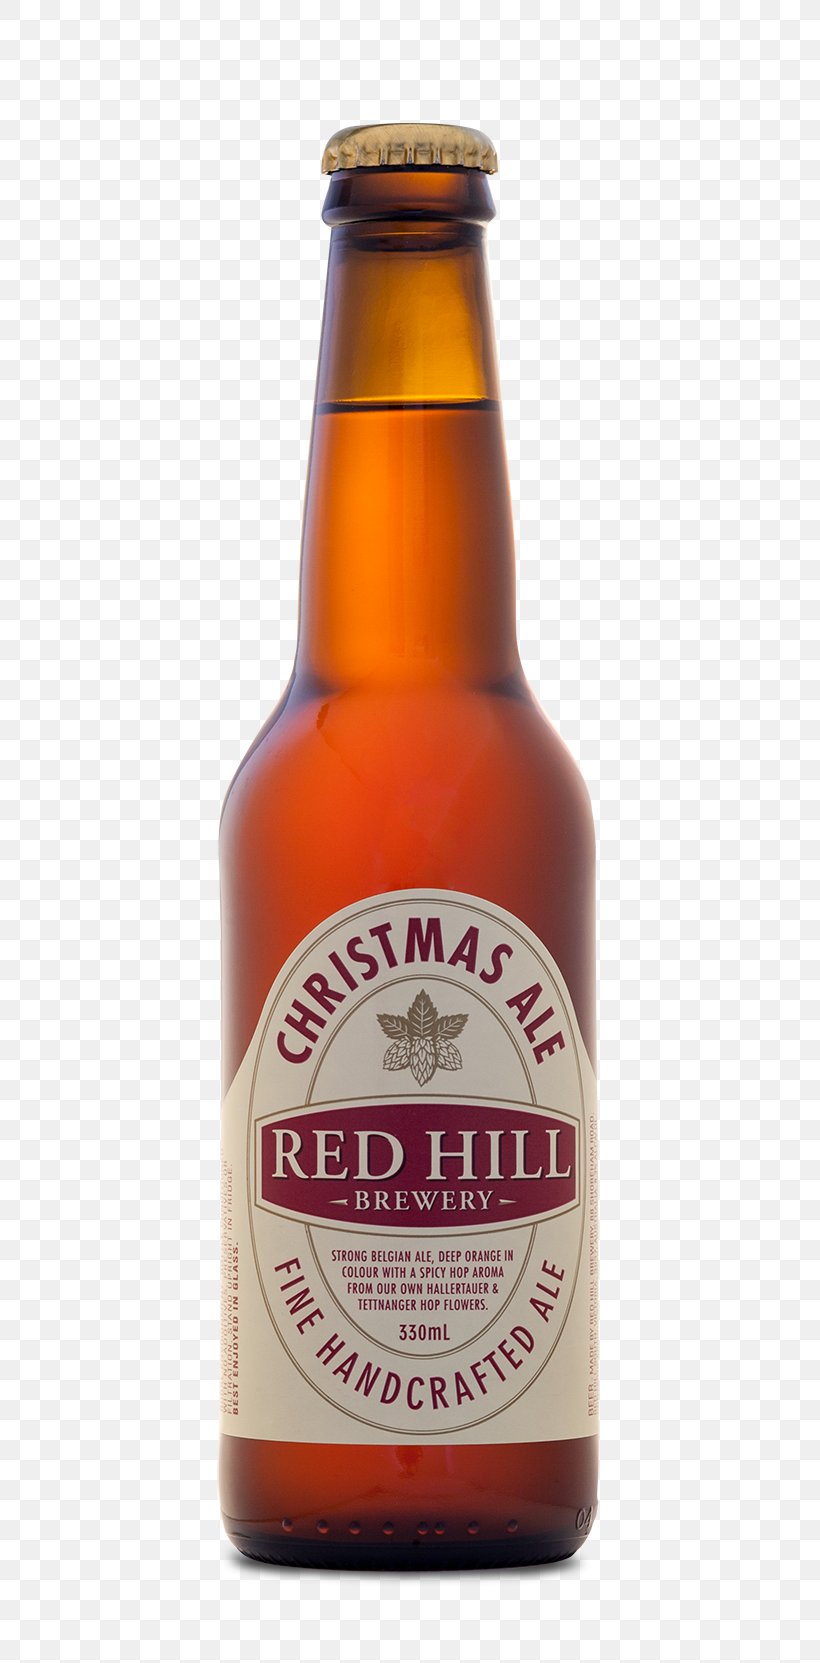 Ale Red Hill Brewery Beer Bottle Lager, PNG, 700x1663px, Ale, Alcoholic Beverage, Beer, Beer Bottle, Beer Brewing Grains Malts Download Free